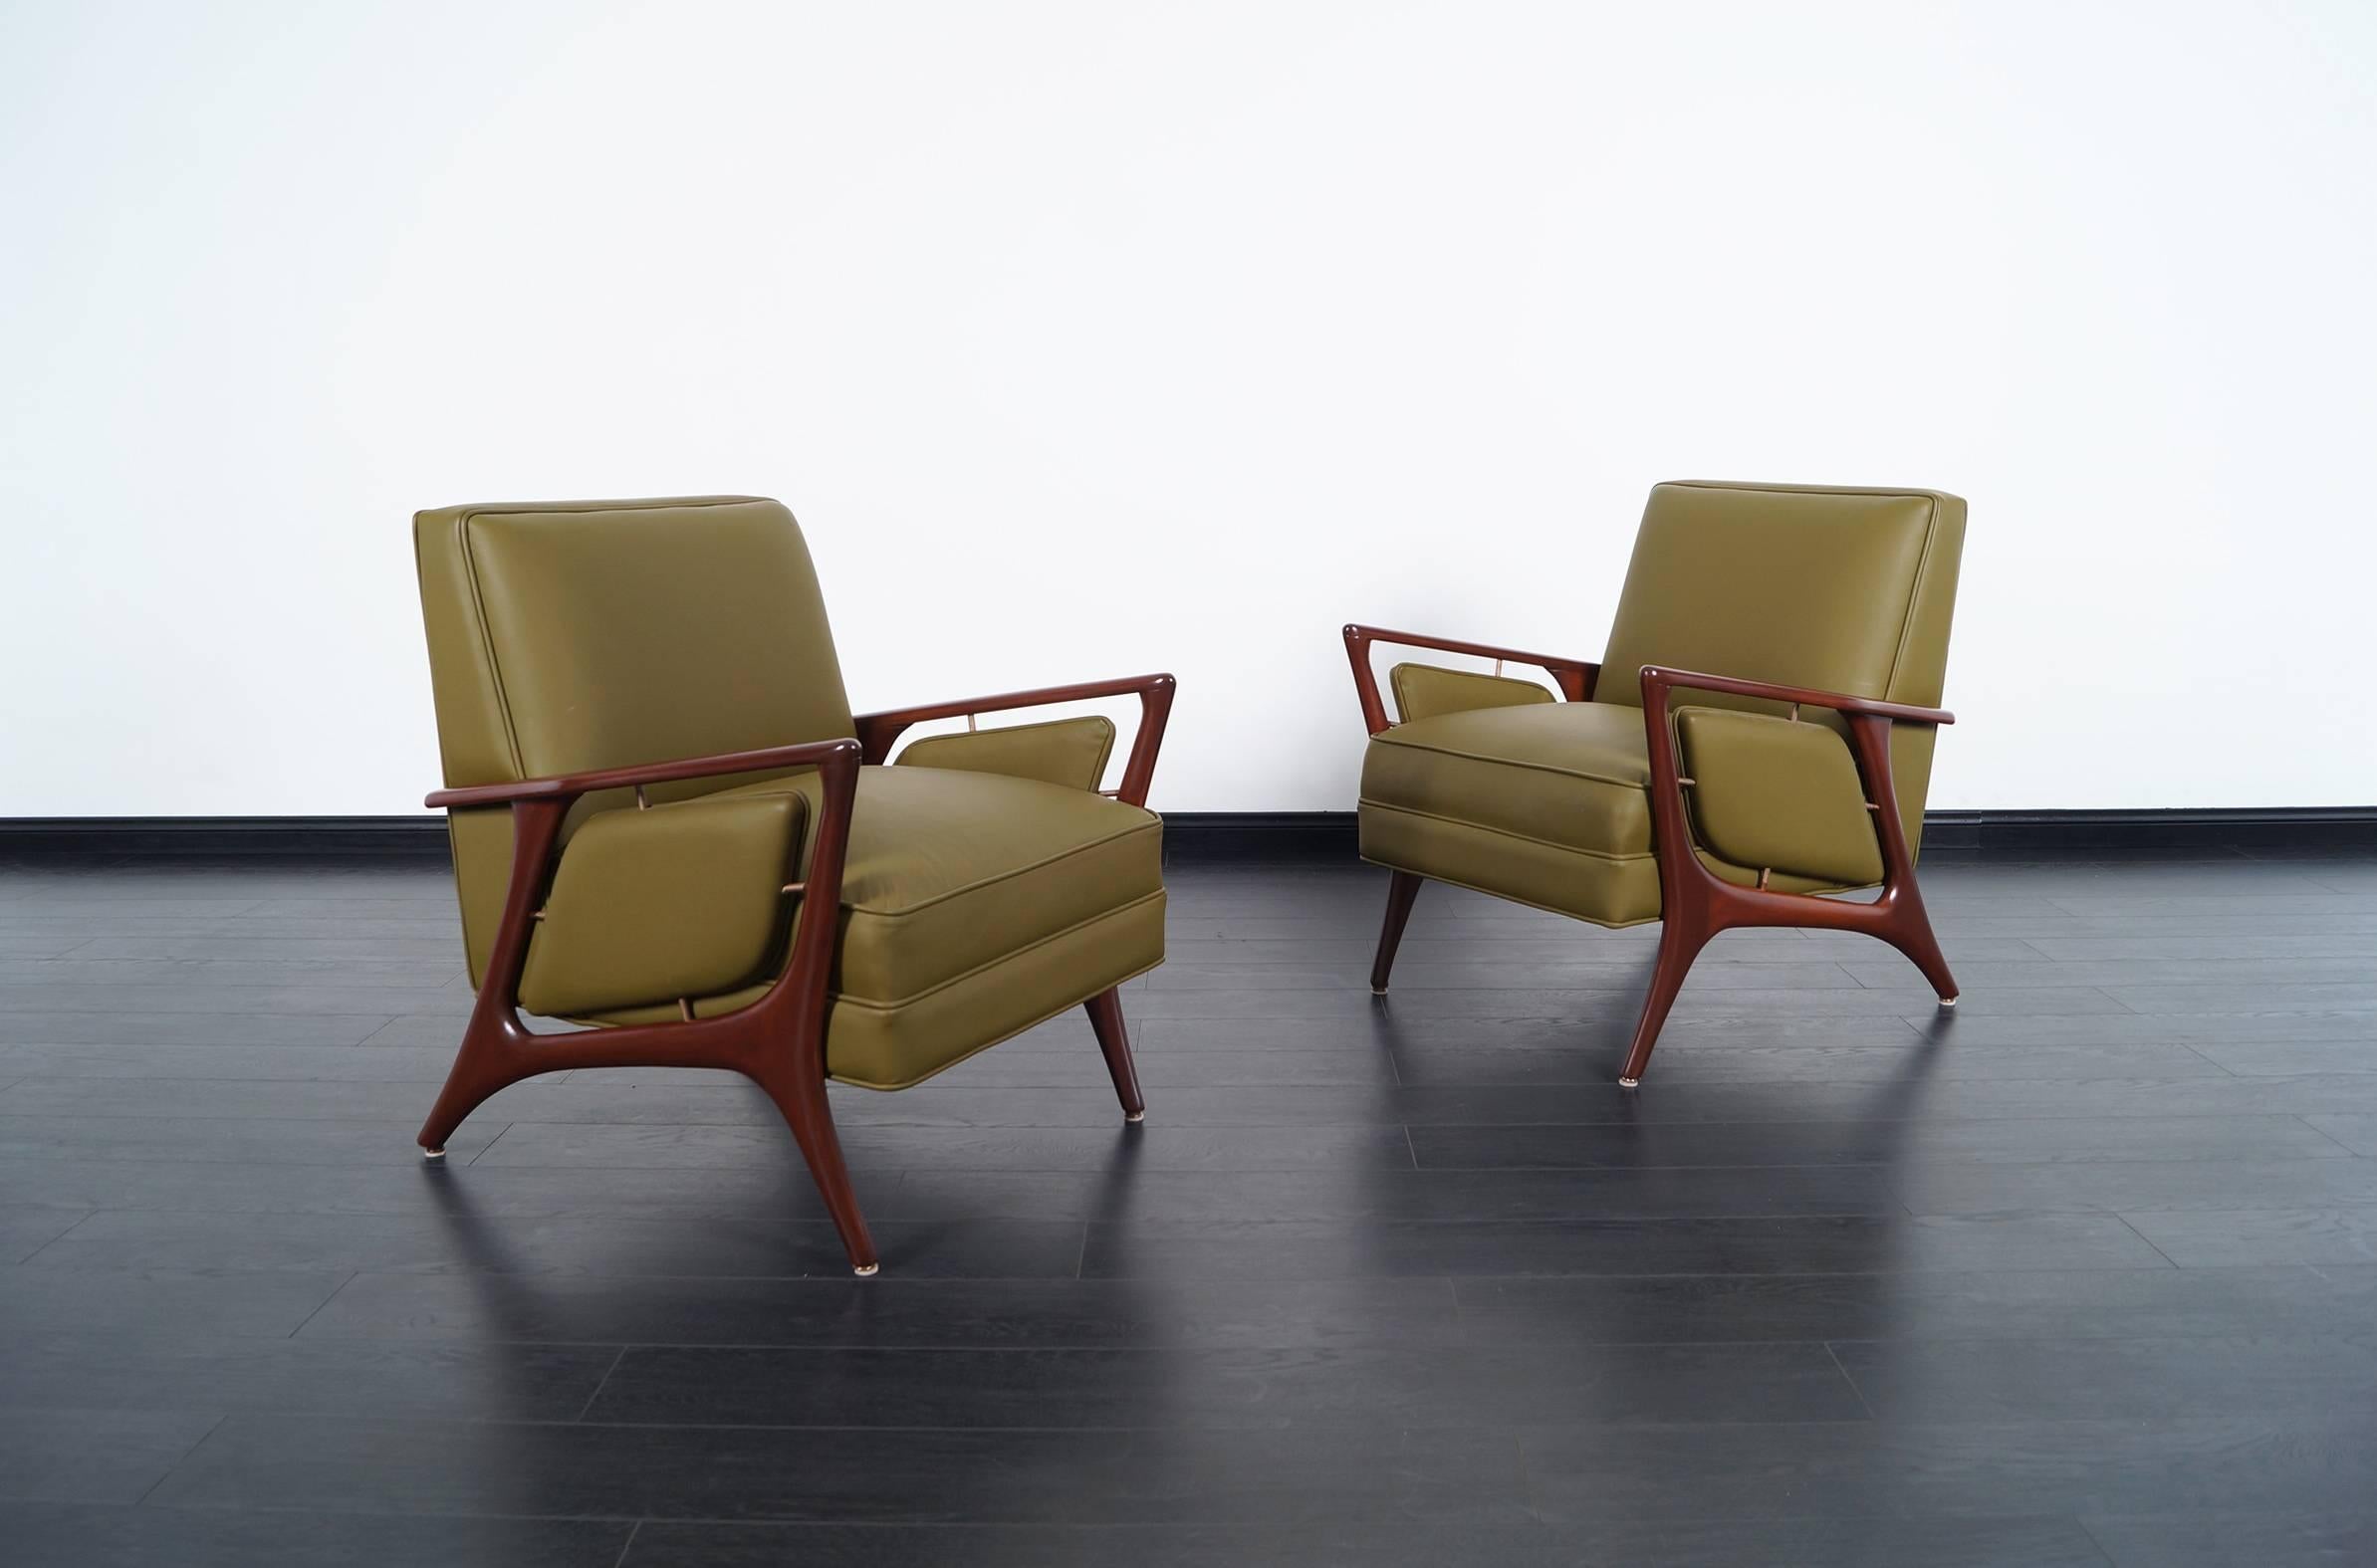 Pair of fabulous modernist lounge chairs designed by Eugenio Escudero. Features sculptural frame with brass details and leather upholstery.